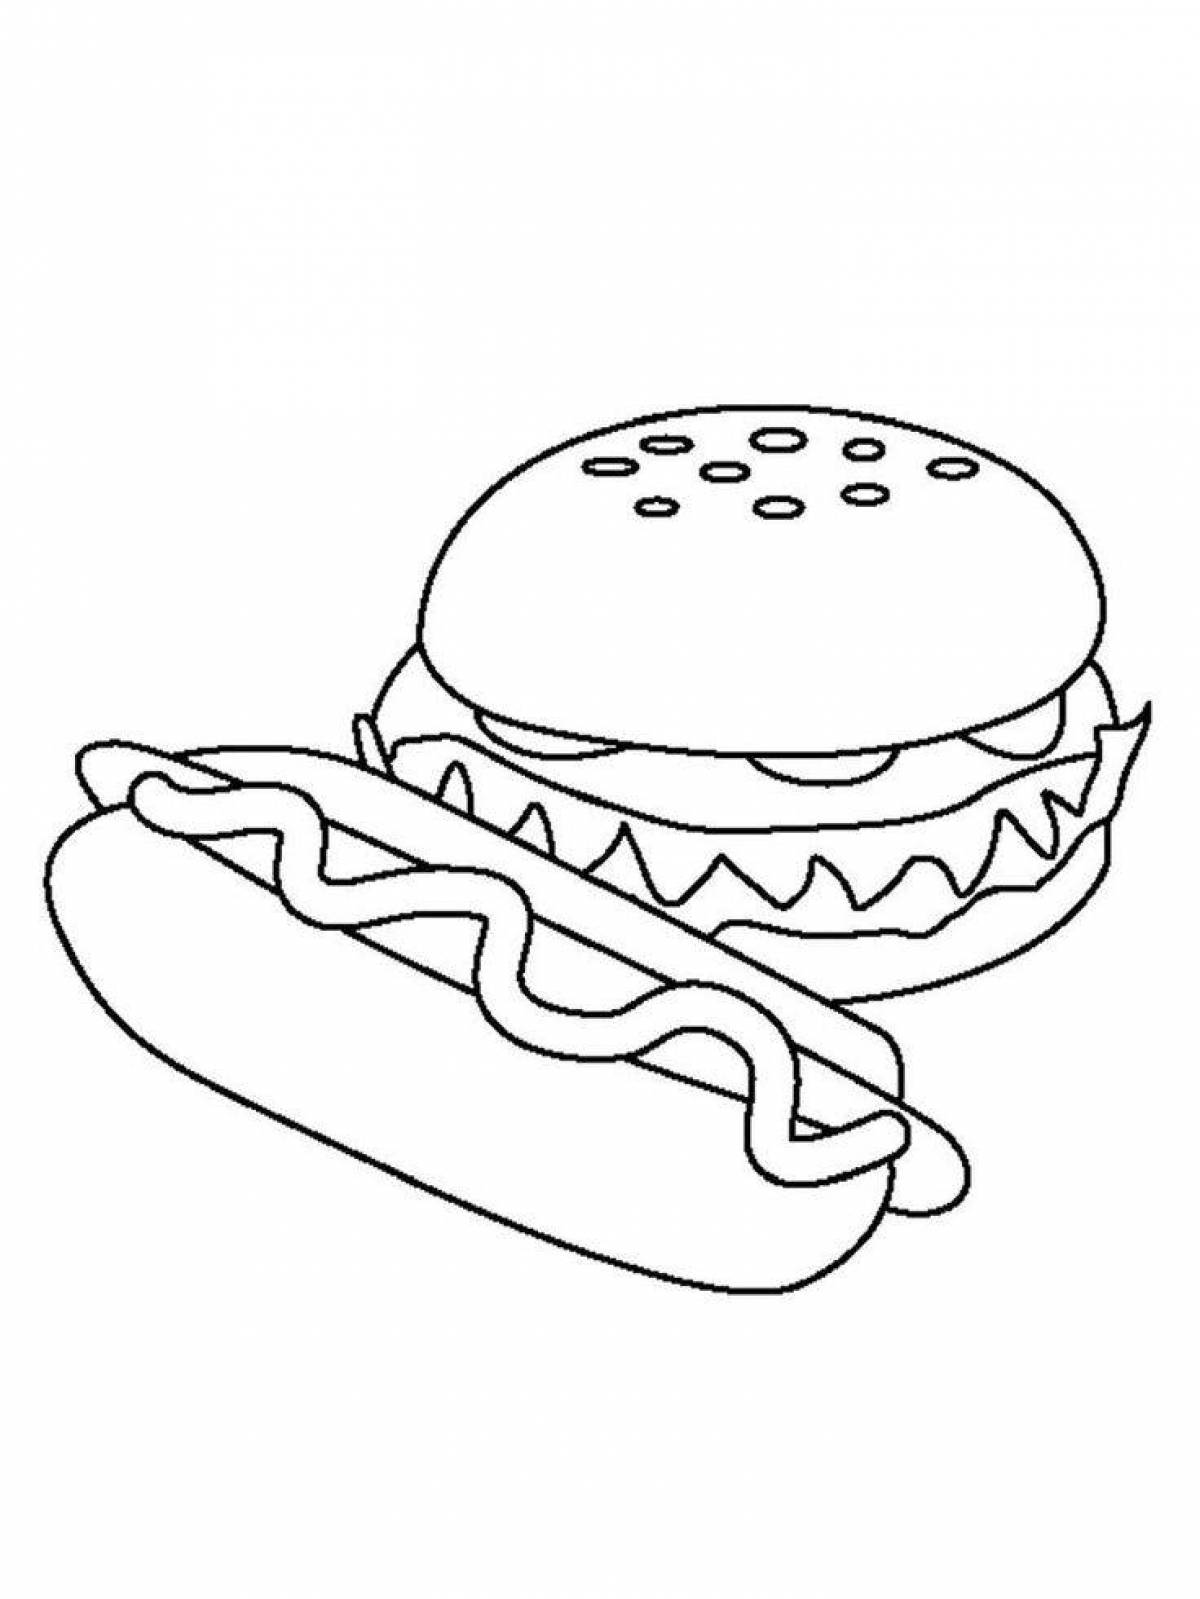 Attractive fast food coloring book